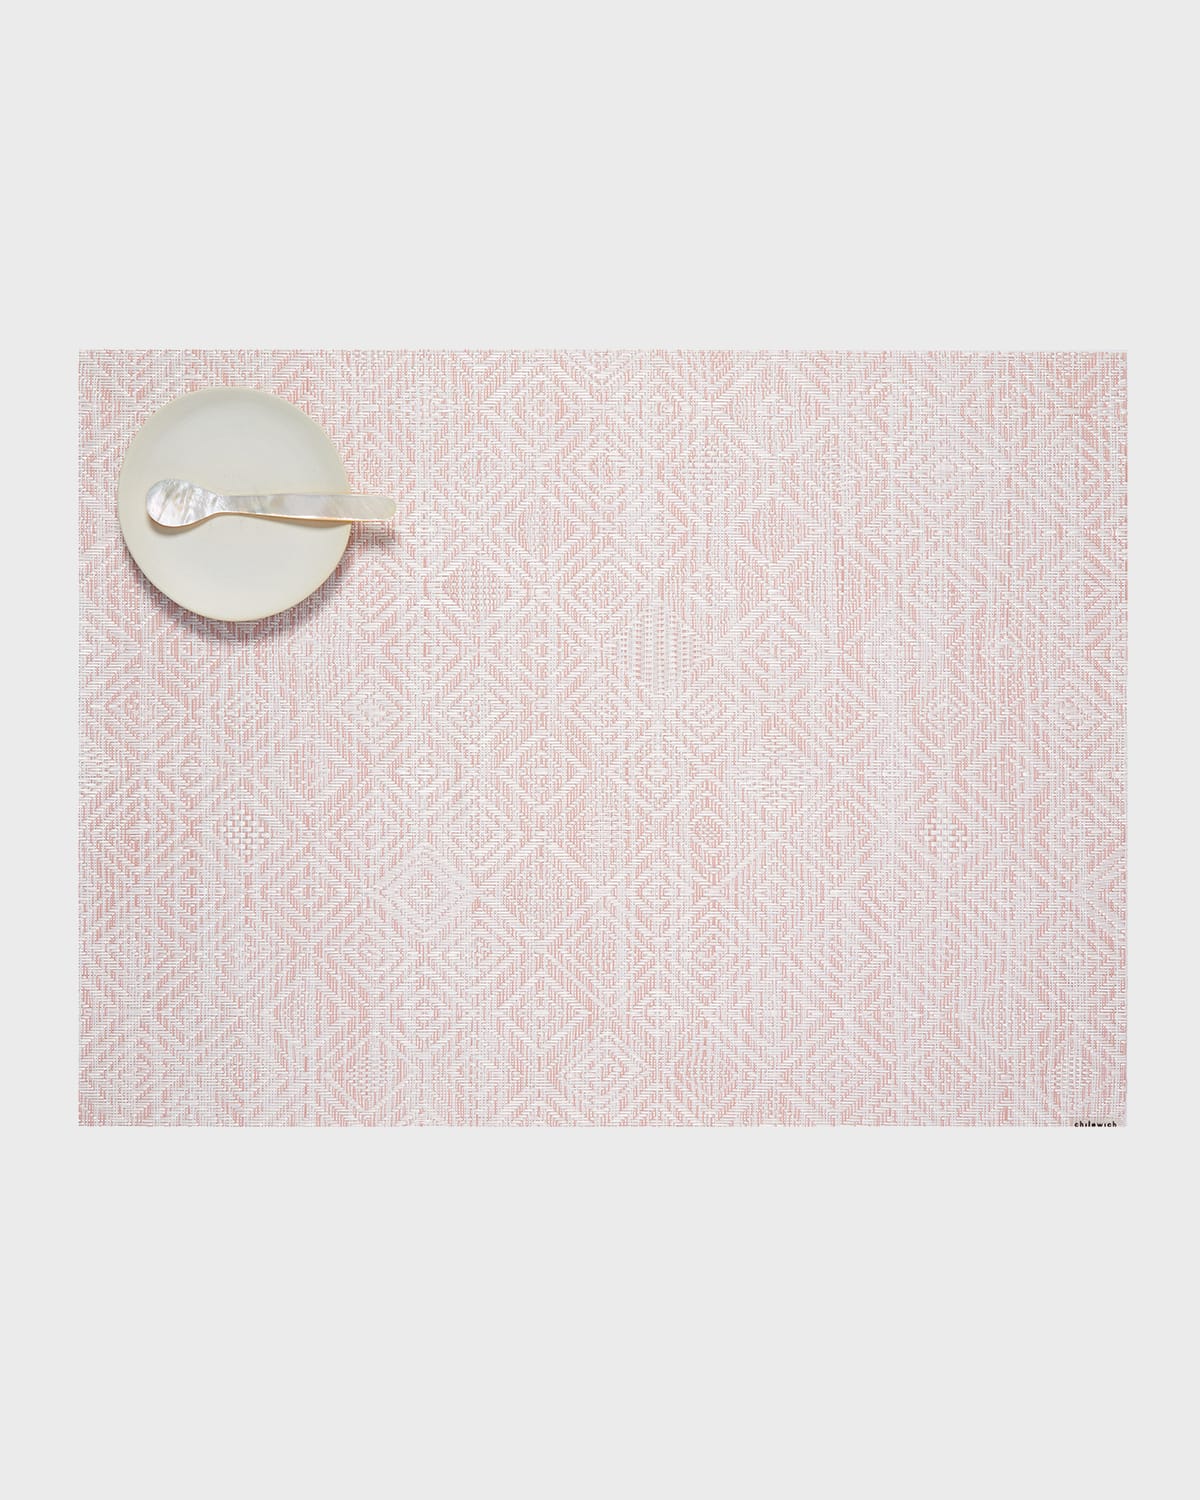 Chilewich Mosaic Placemat, 19" X 14" In Pink Lemon